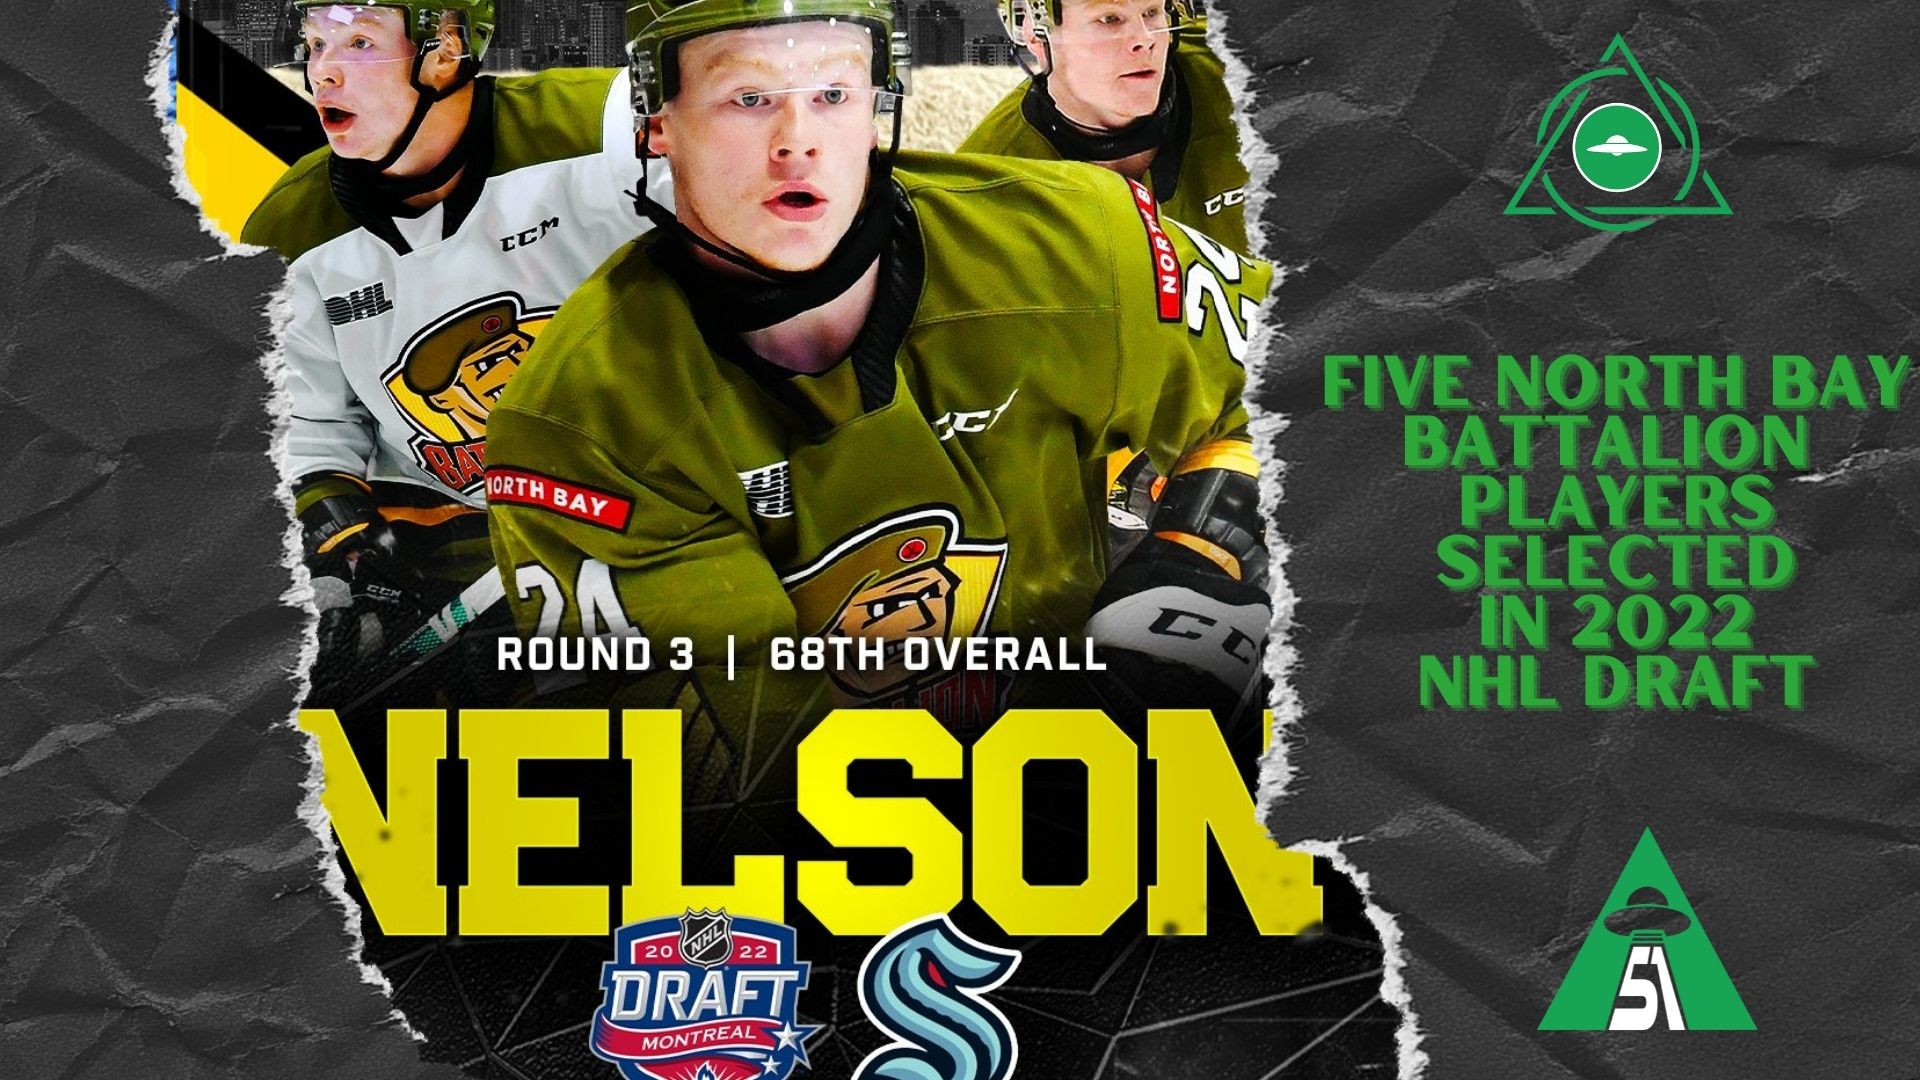 North Bay Battalion have five selected in 2022 NHL Draft